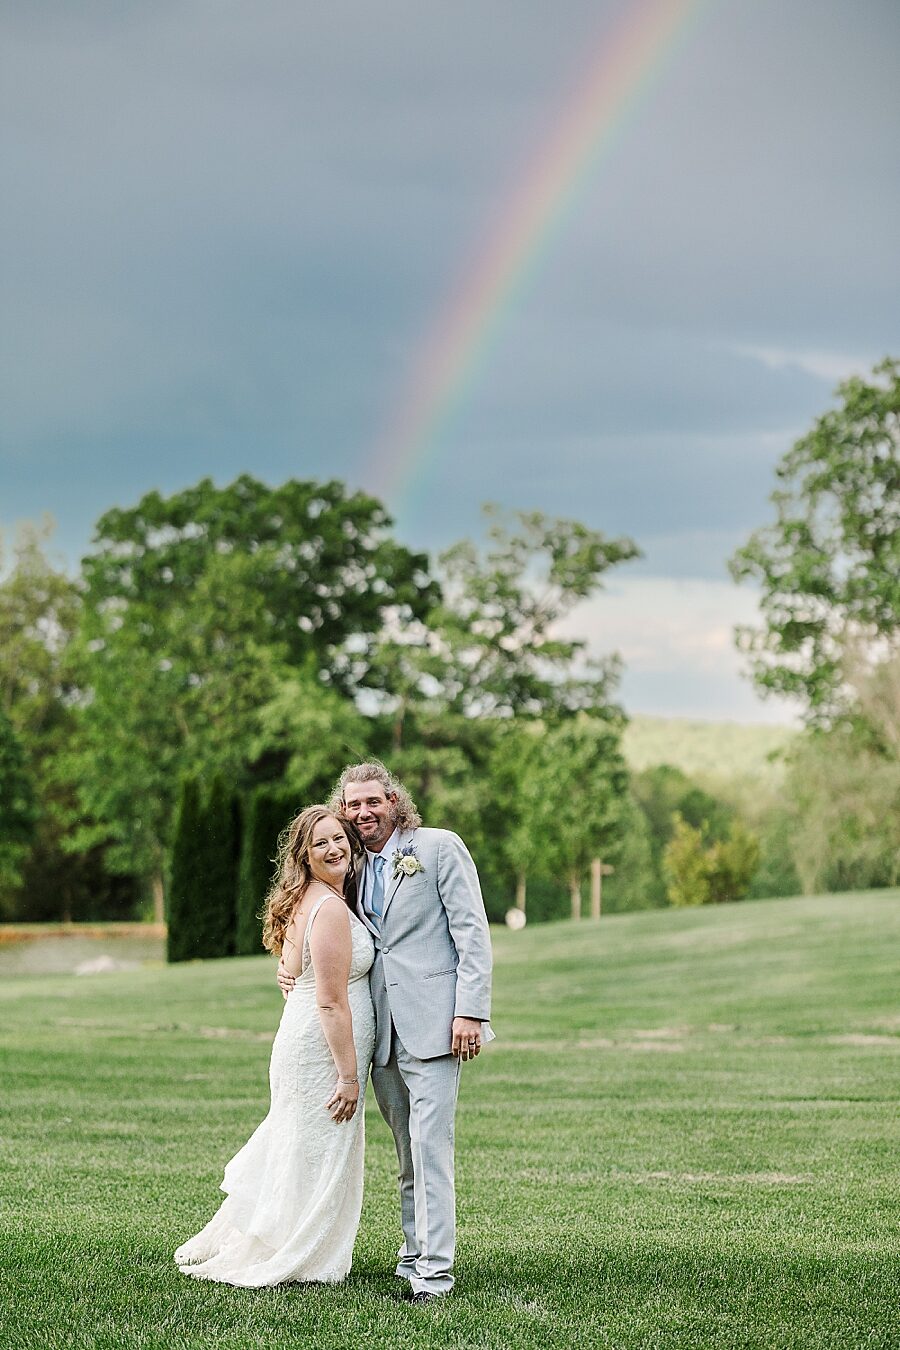 Smiling in front of the rainbow at Castleton Farms Wedding by Amanda May Photos